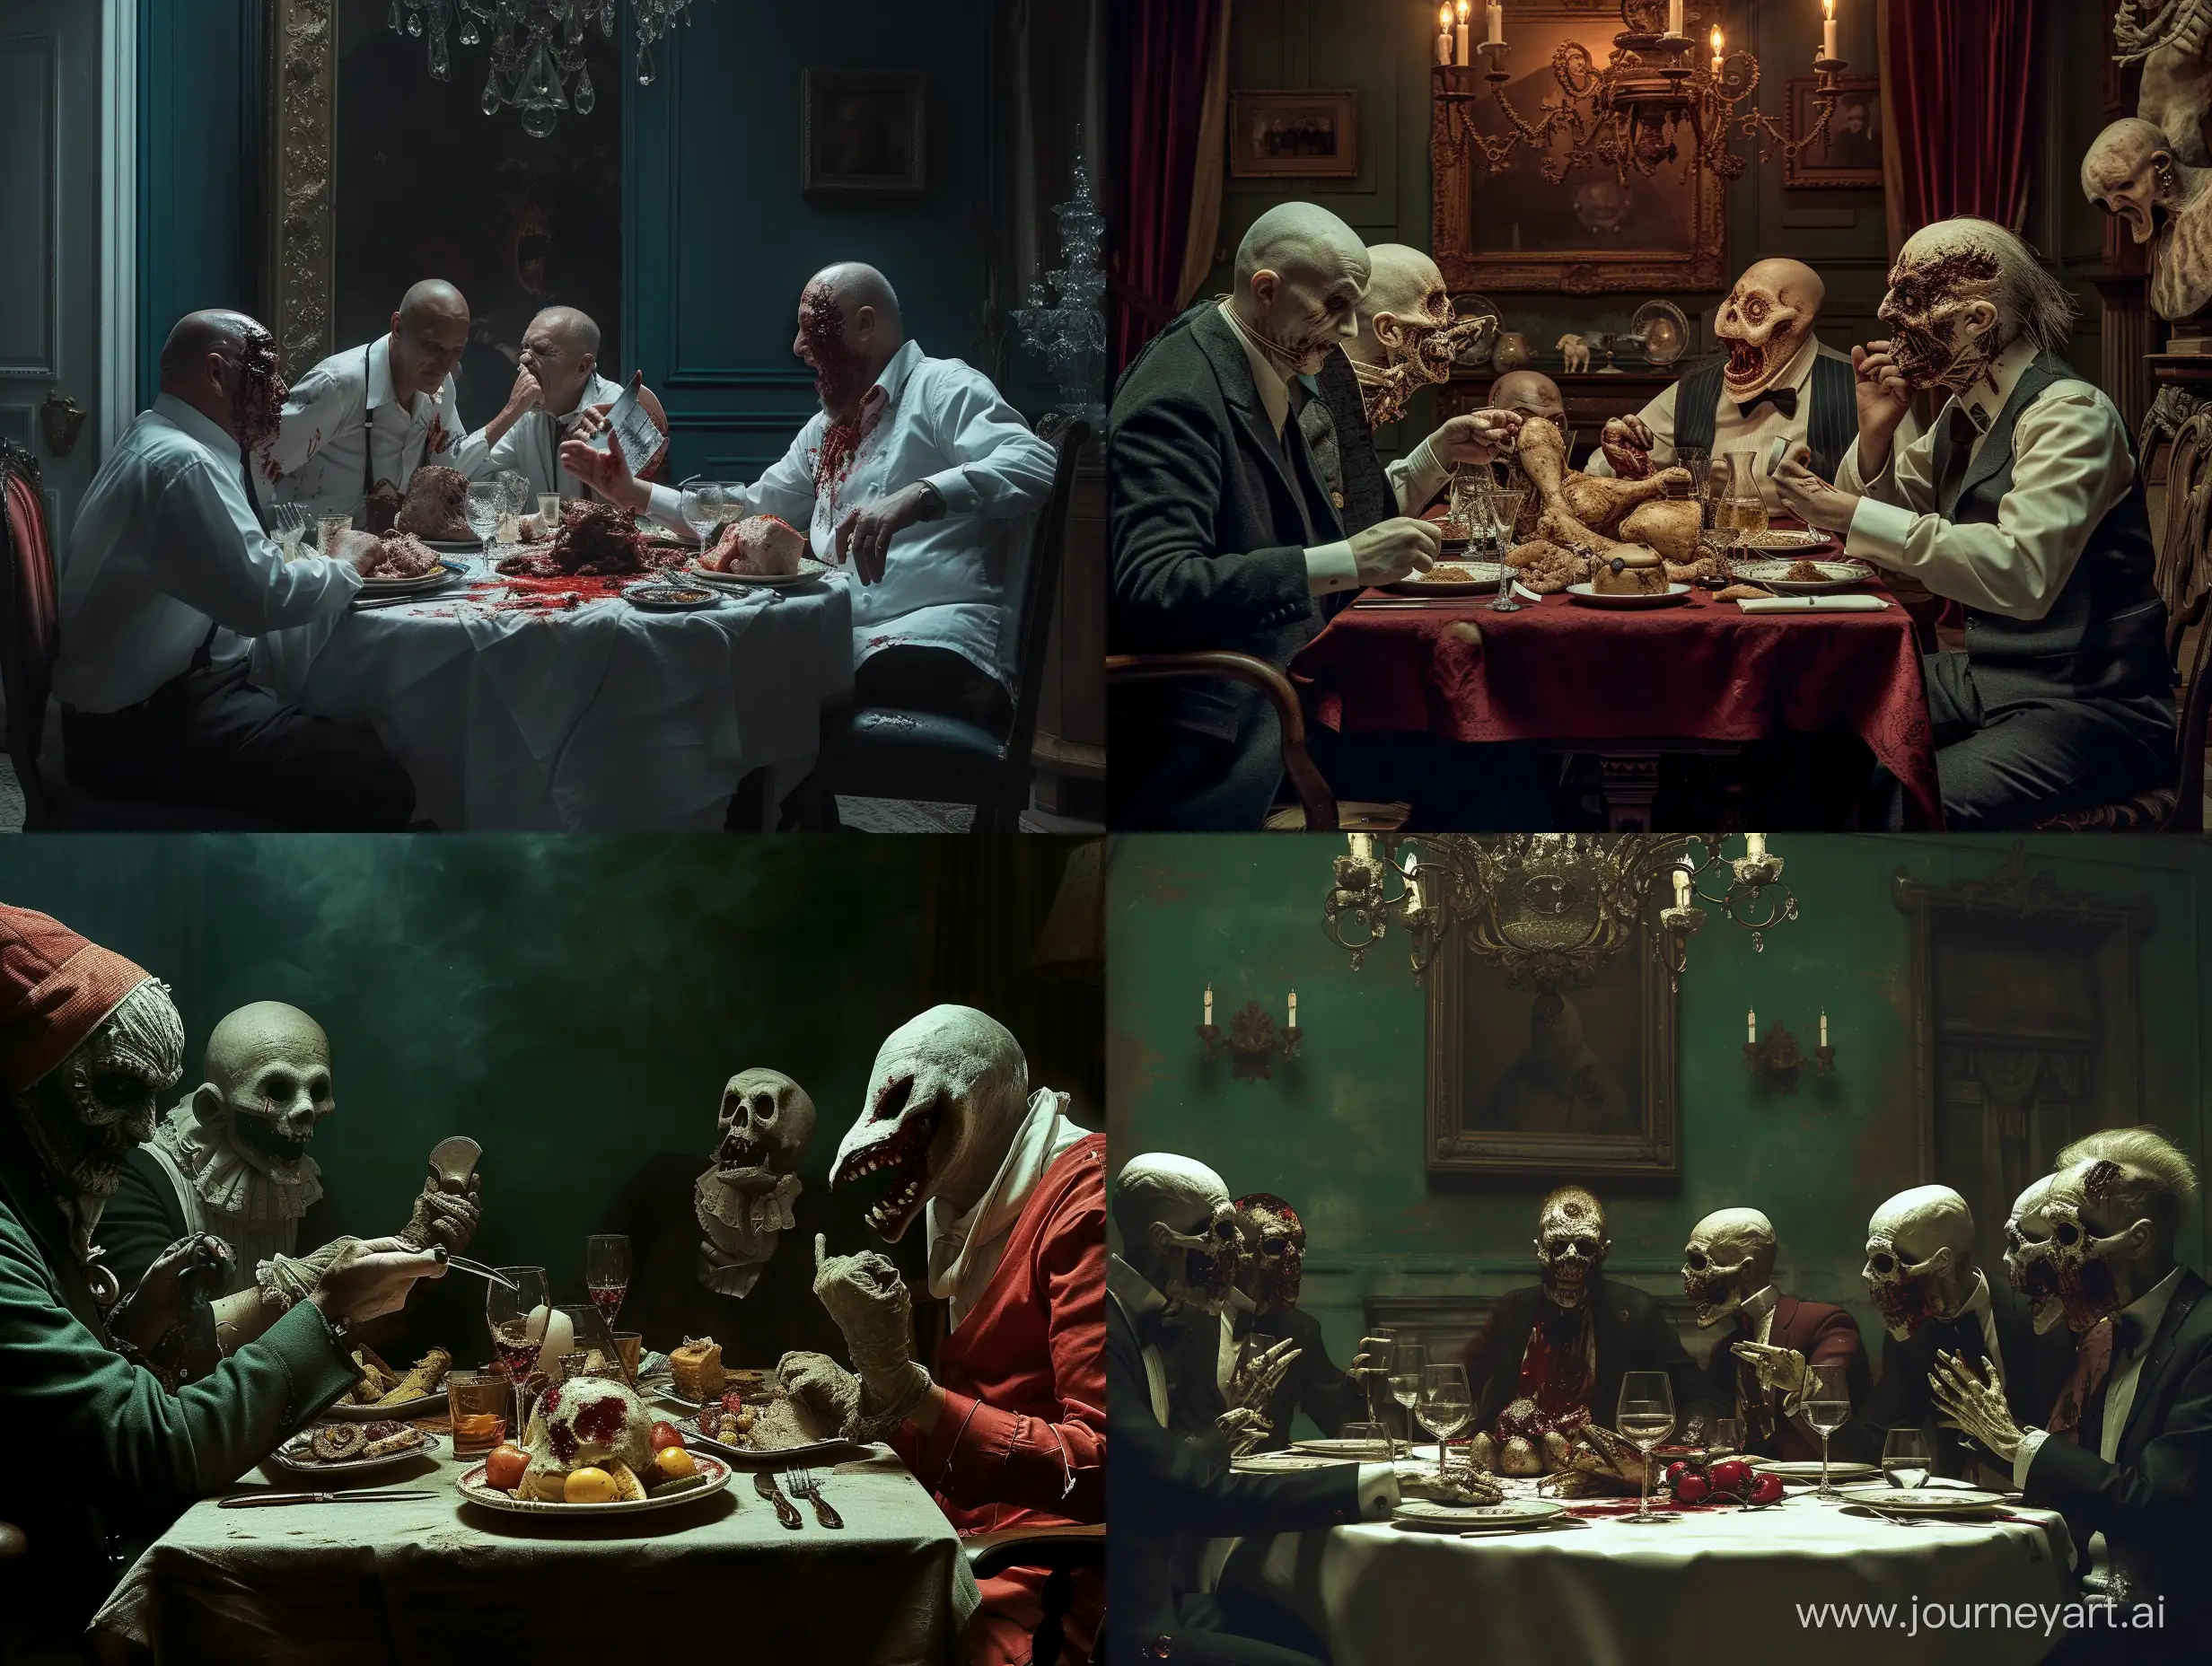 A darkly humorous scene where a group of eccentric killers gather for a night of fine dining, discussing their gruesome methods and sharing a laugh over their shared hobby. Bon appetite!, phone photo,